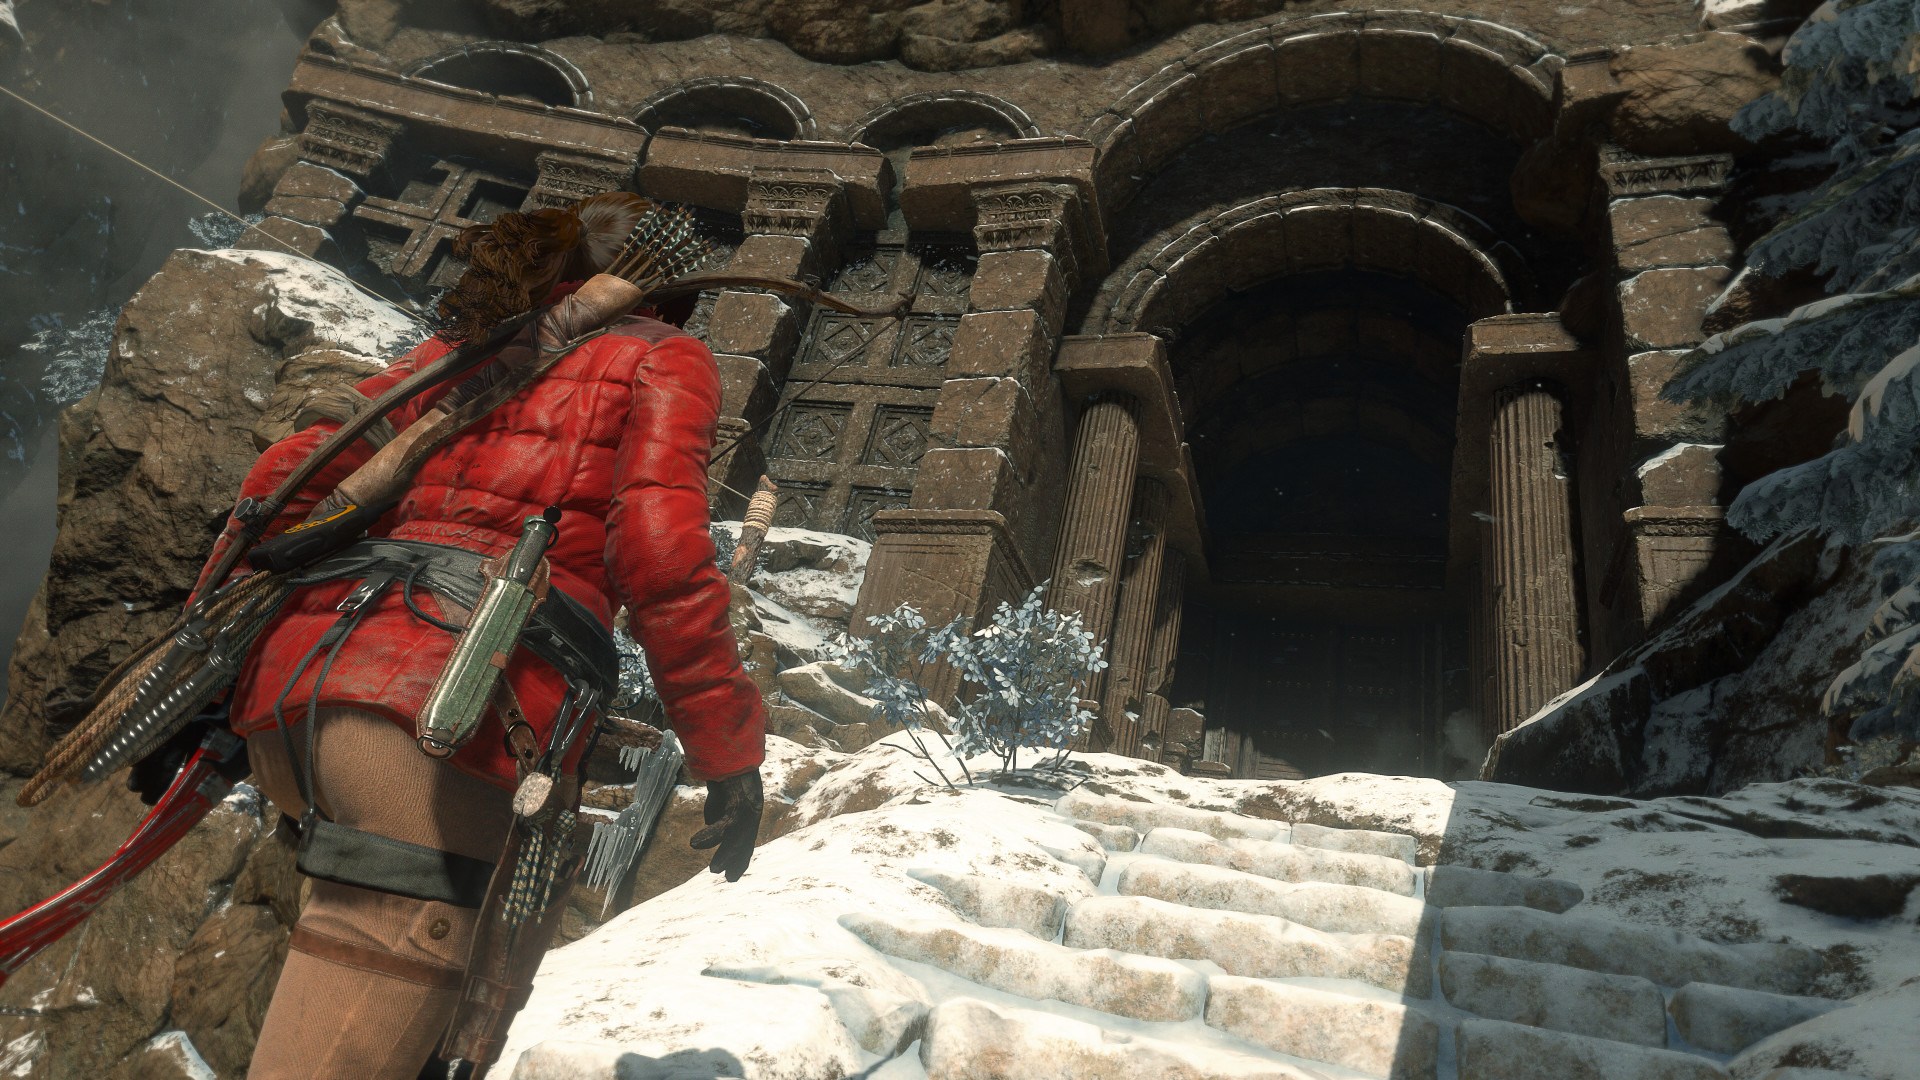 Rise of the Tomb Raider™